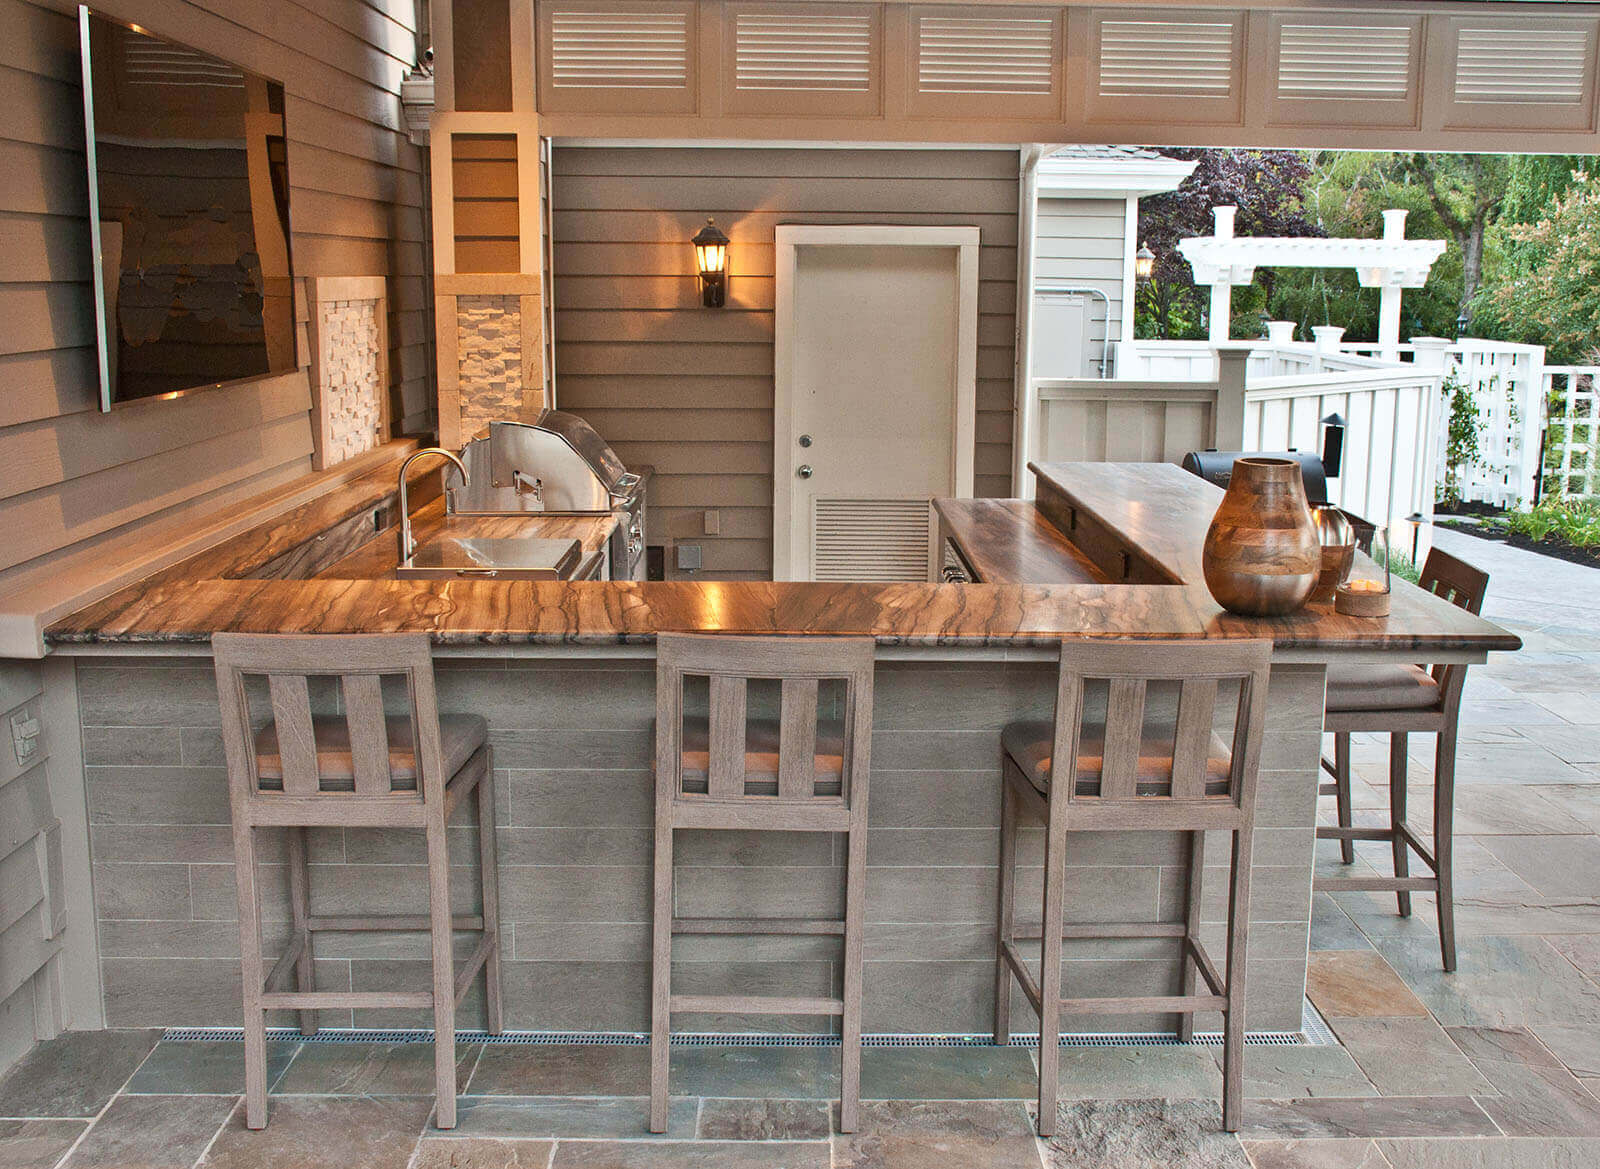 Striped staged marble counter tops with covered grilling area and bar seating